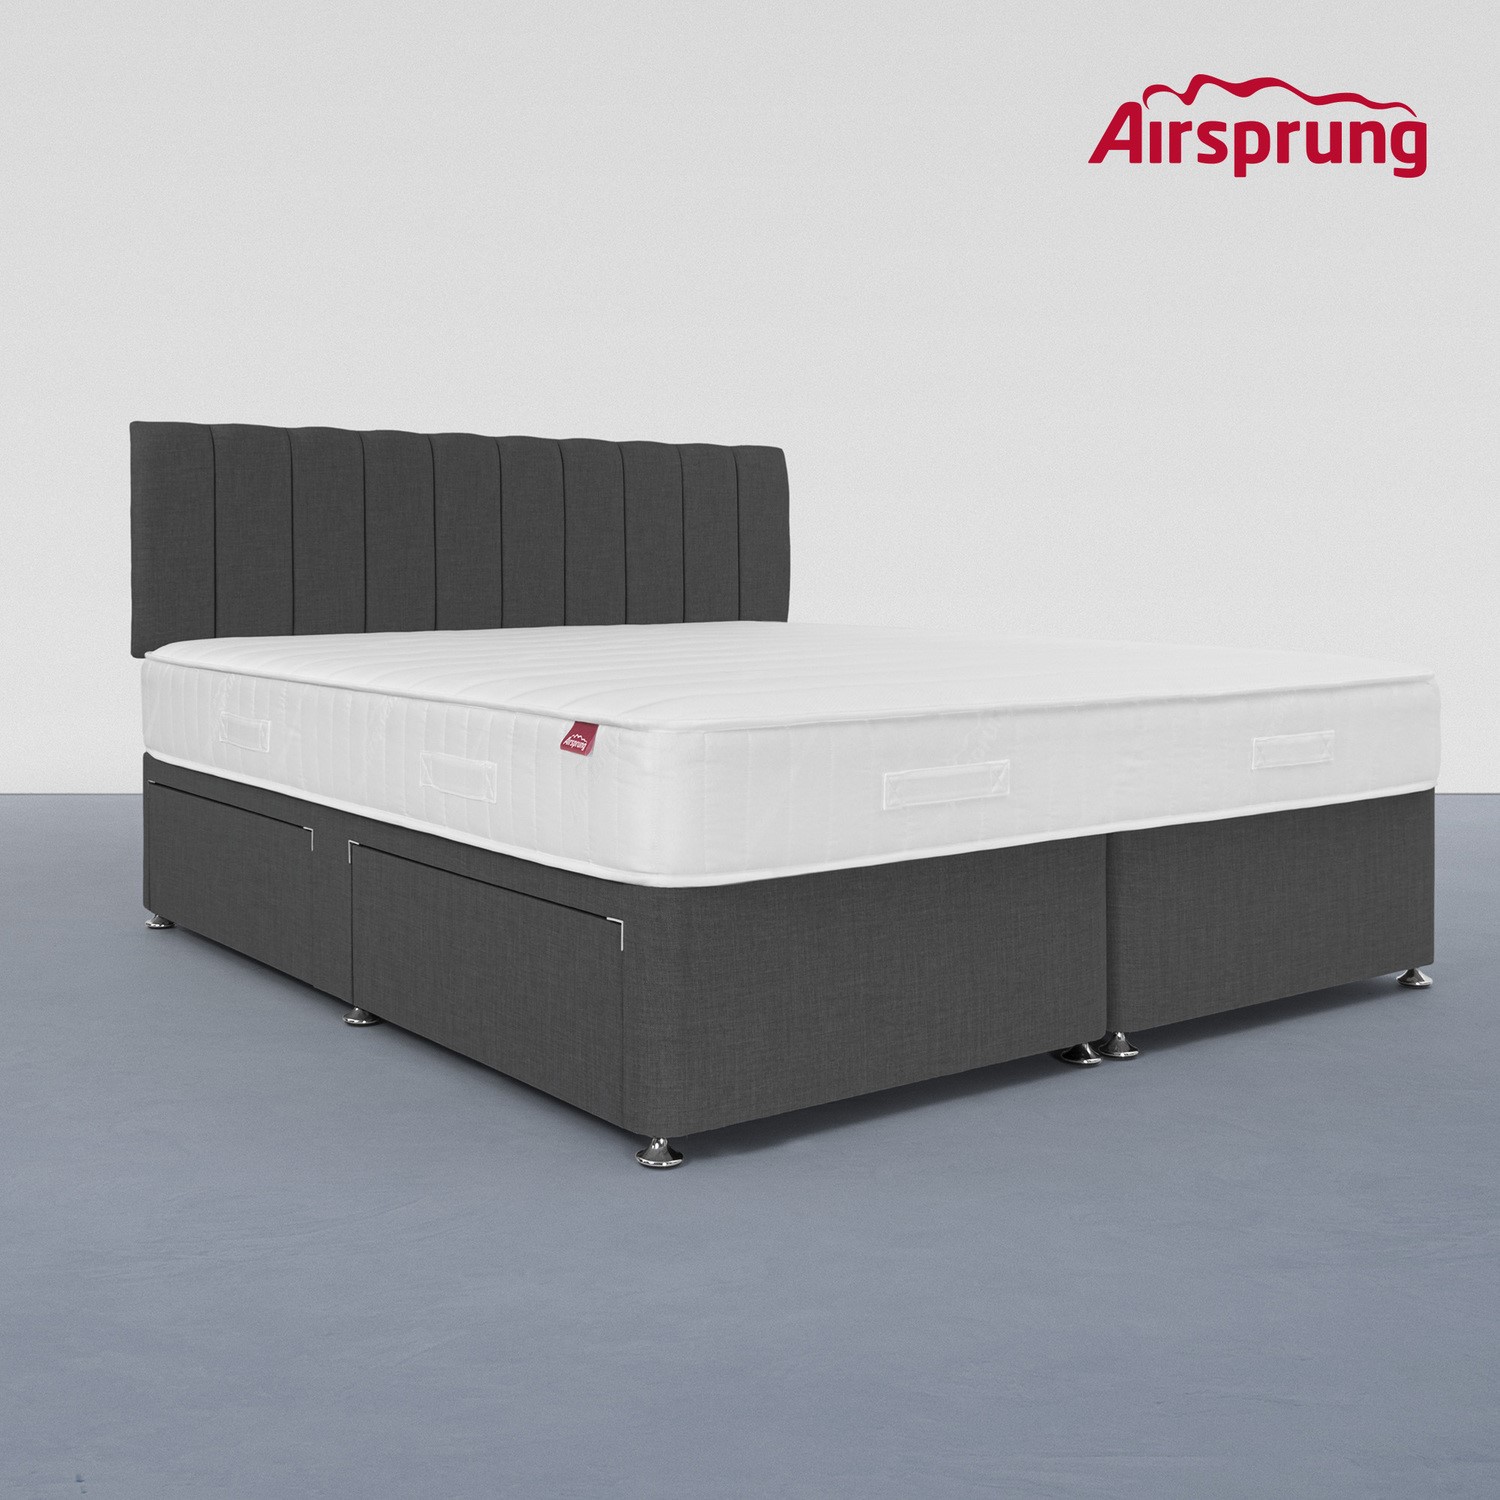 Photo of Airsprung super king 4 drawer divan bed with hybrid mattress - charcoal